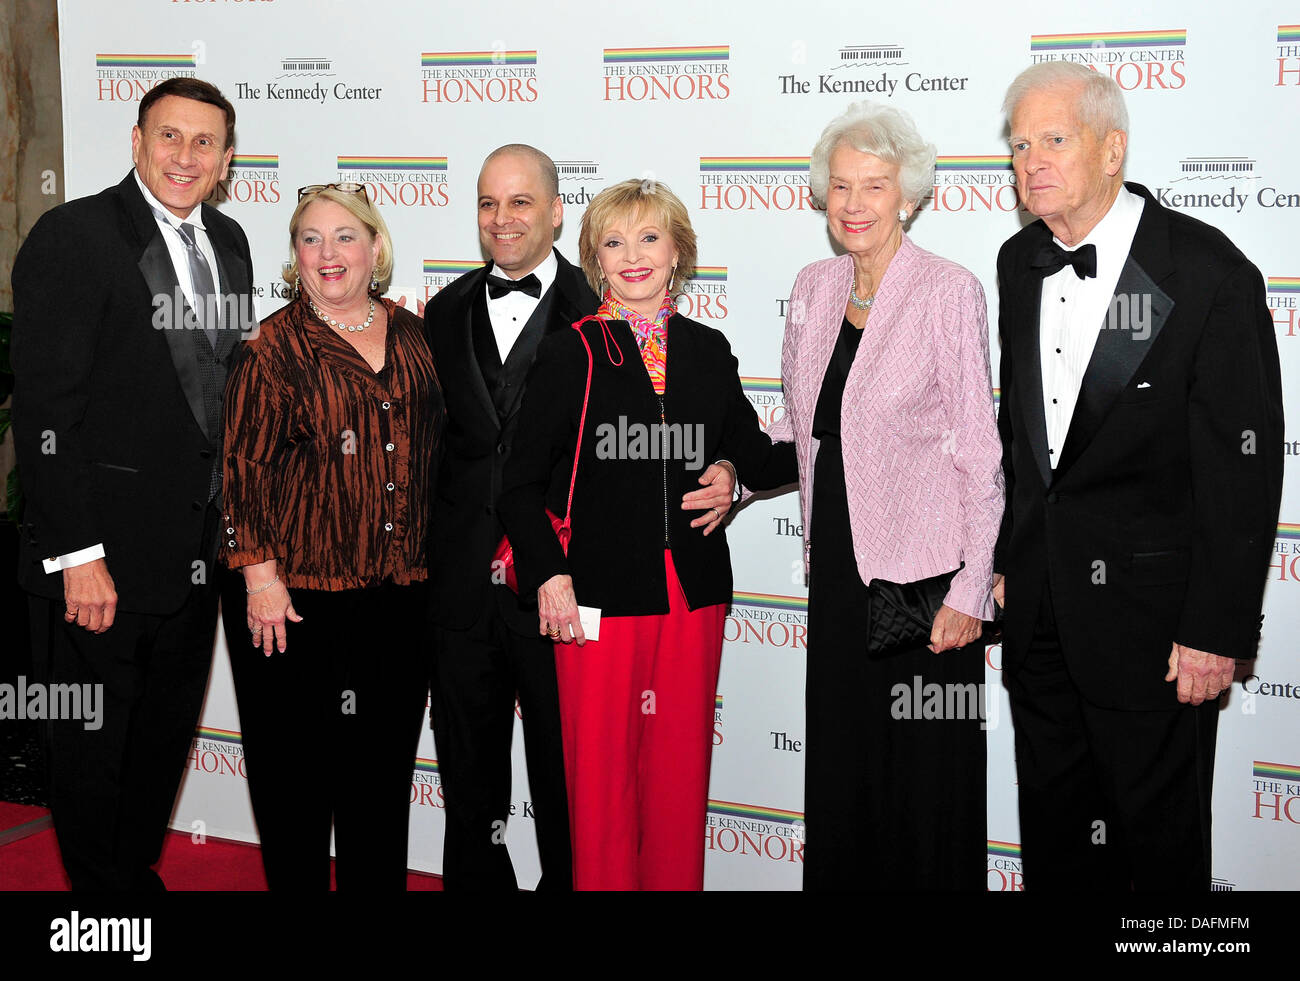 From left to right: United States Representative John Mica (Republican of Florida), wife, Patricia, Robert Bernstein, Florence Henderson, Marjorie Billington, and James H. Billington, the Librarian of Congress, arrive for the formal Artist's Dinner honoring the recipients of the 2011 Kennedy Center Honors hosted by United States Secretary of State Hillary Rodham Clinton at the U.S. Stock Photo